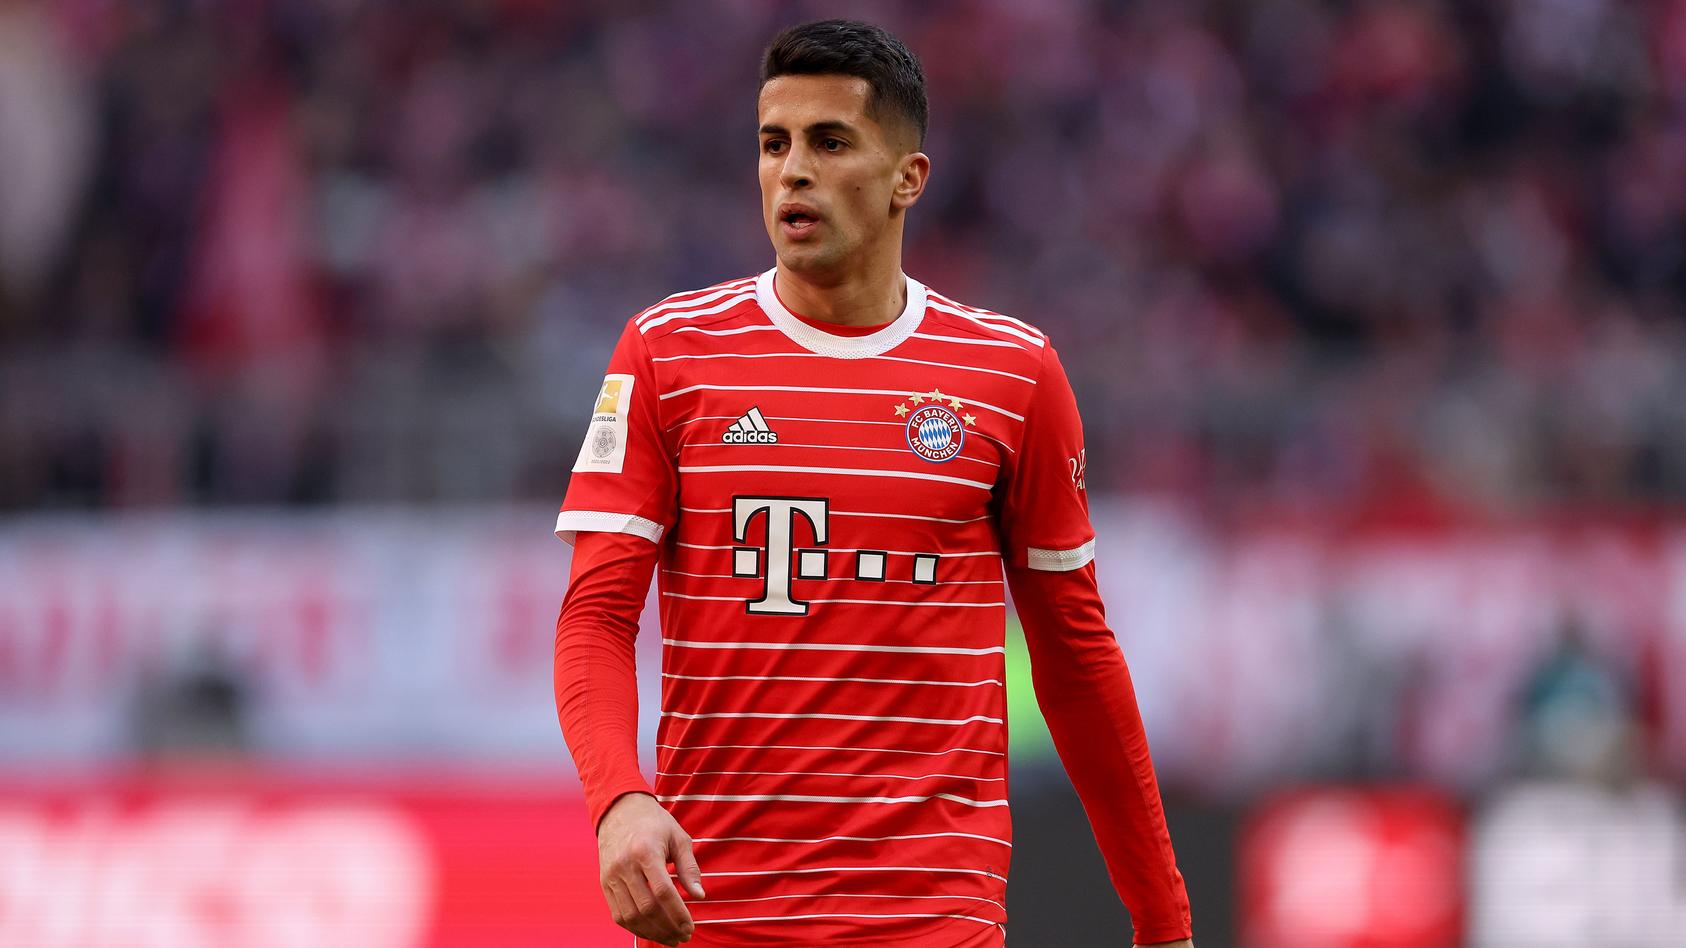 MUNICH, GERMANY - MARCH 11: Joao Cancelo of FC Bayern MÃ¼nchen looks on during the Bundesliga match between FC Bayern MÃ¼nchen and FC Augsburg at Allianz Arena on March 11, 2023 in Munich, Germany. (Photo by Alexander Hassenstein/Getty Images)